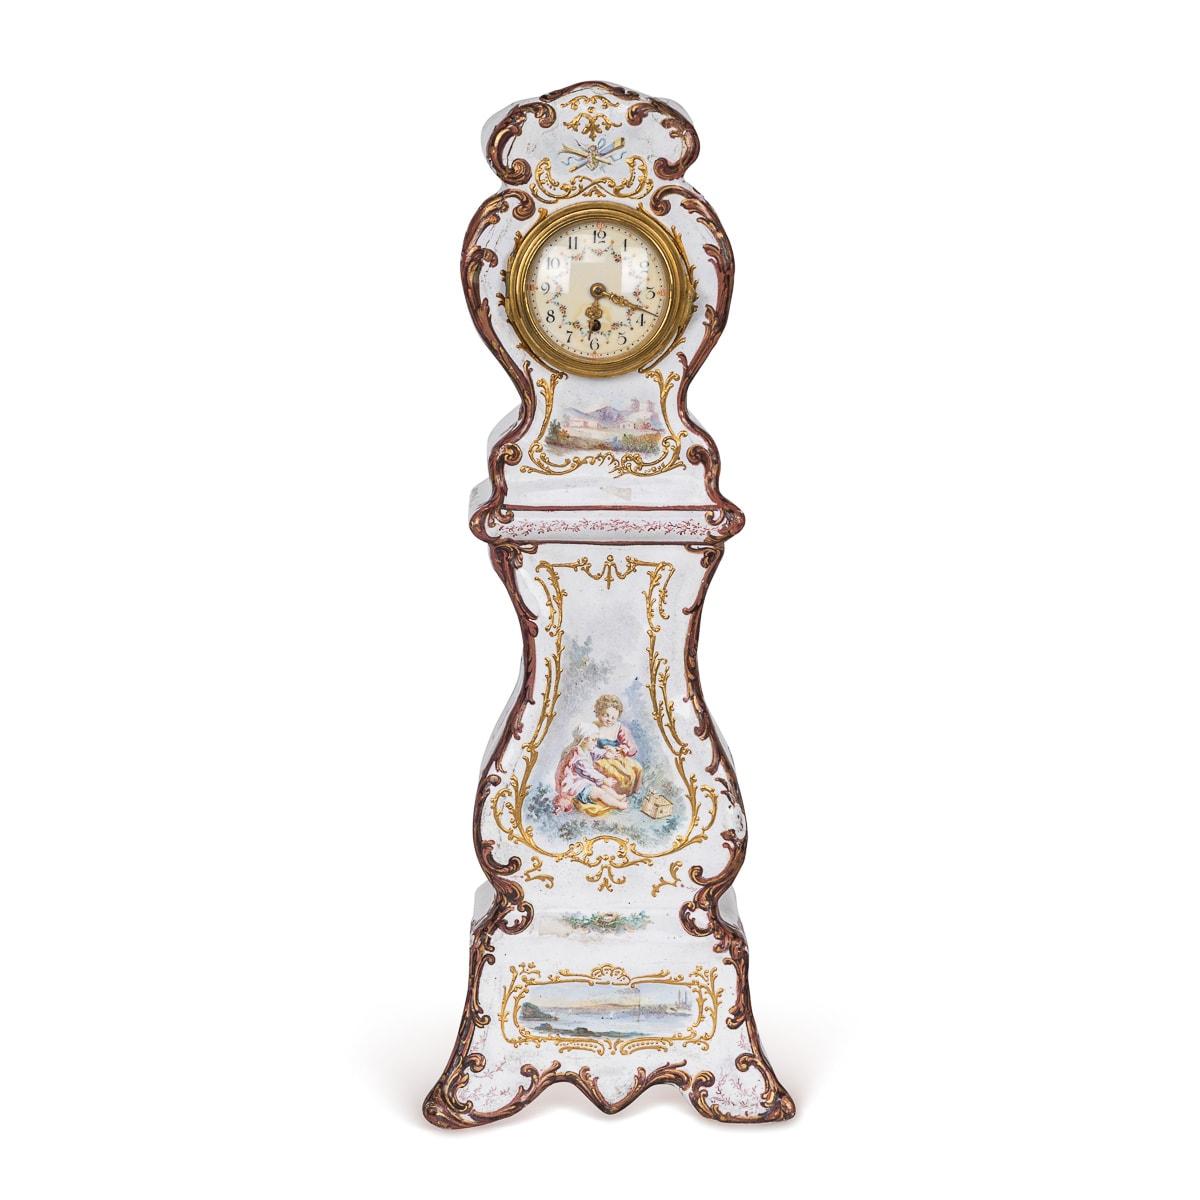 Antique 18th Century English enamel table clock, exuding charm, its delicate white enamel adorned with floral motifs and romantic scenes. Made in a miniature form of a grandfather clock, of curved upright form, embellished with foliage painted along